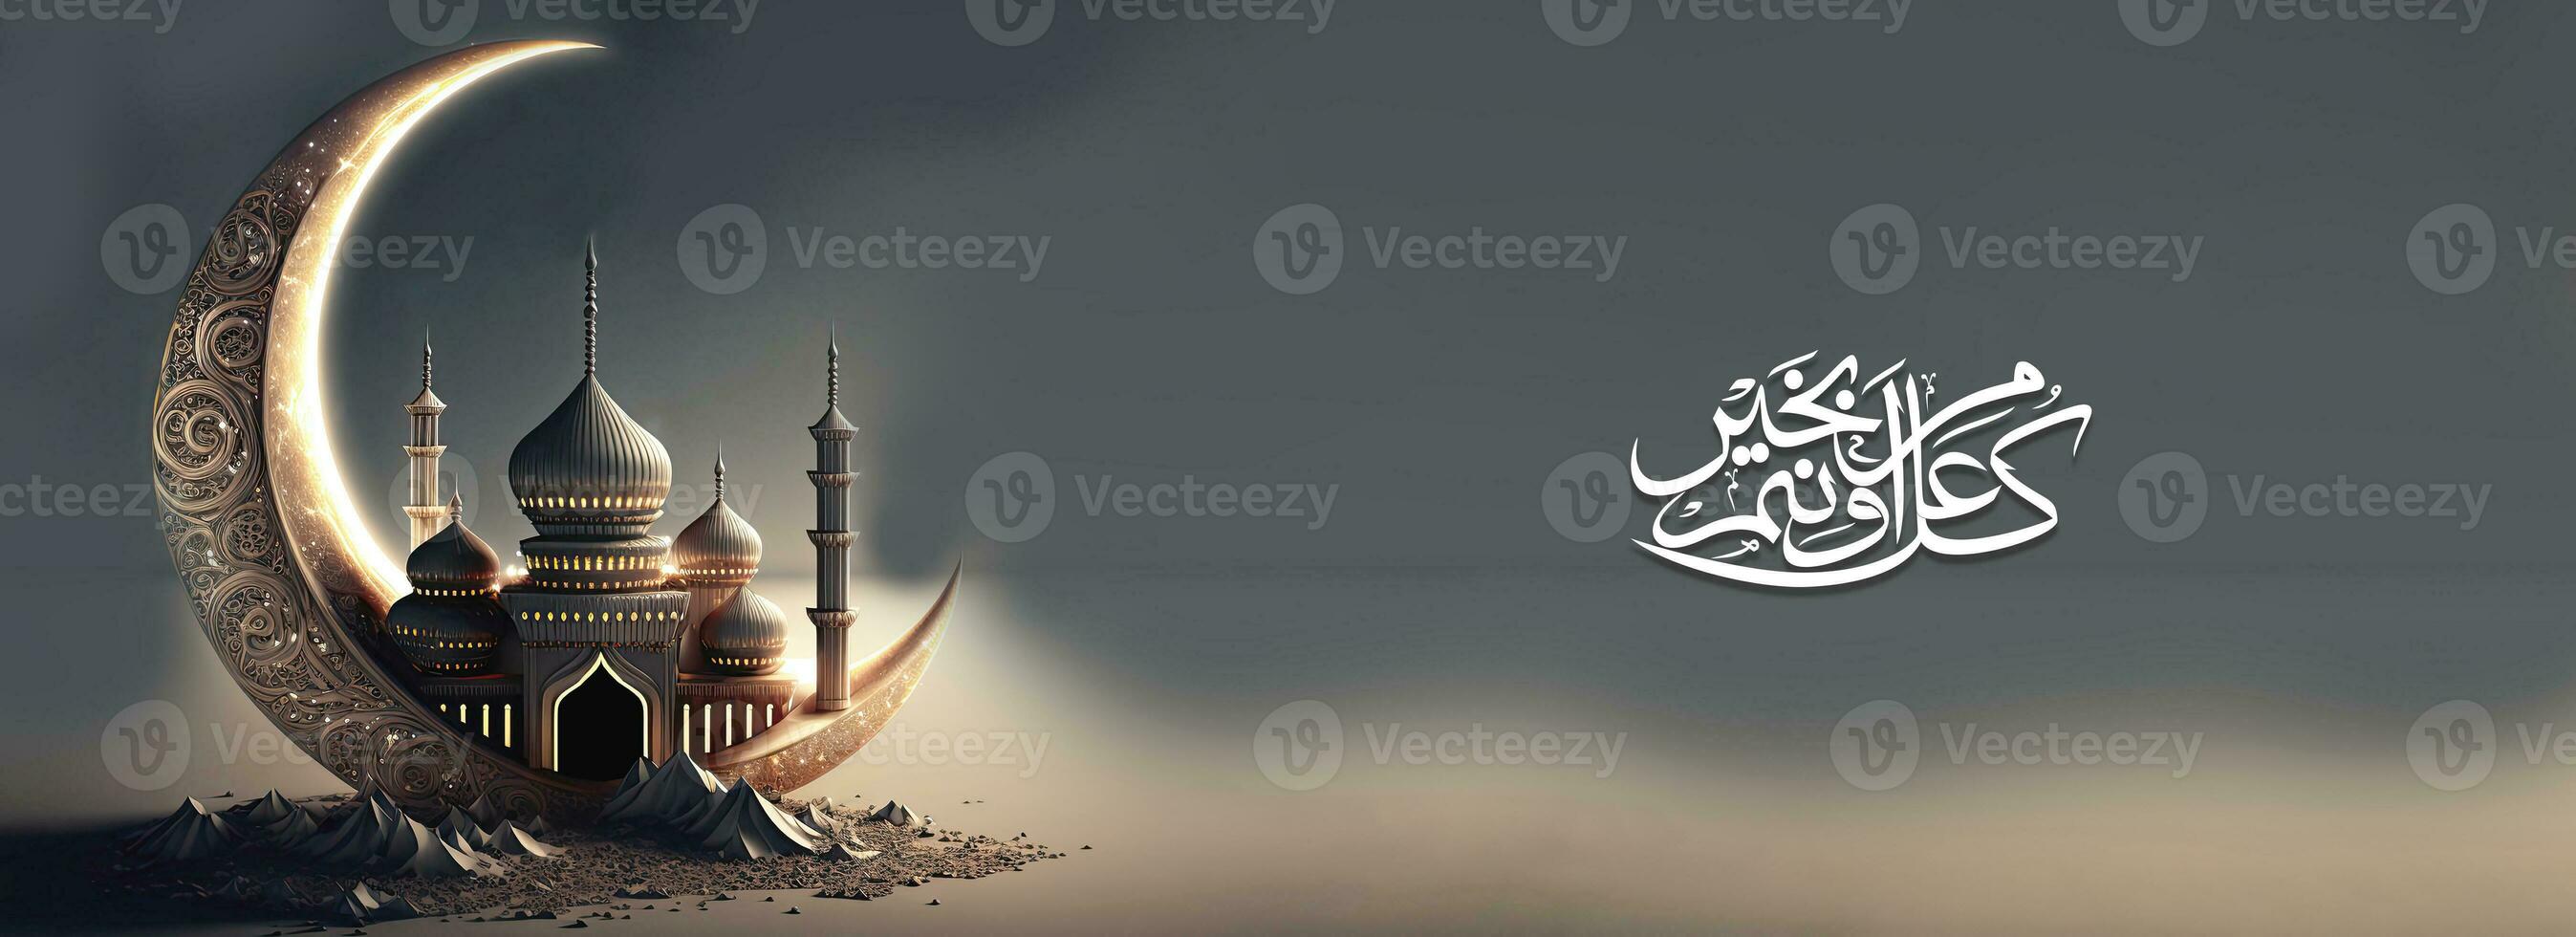 Arabic Islamic Calligraphy of Wish May you be well every year, 3D Render of Exquisite Crescent Moon With Mosque On Gray Background. photo